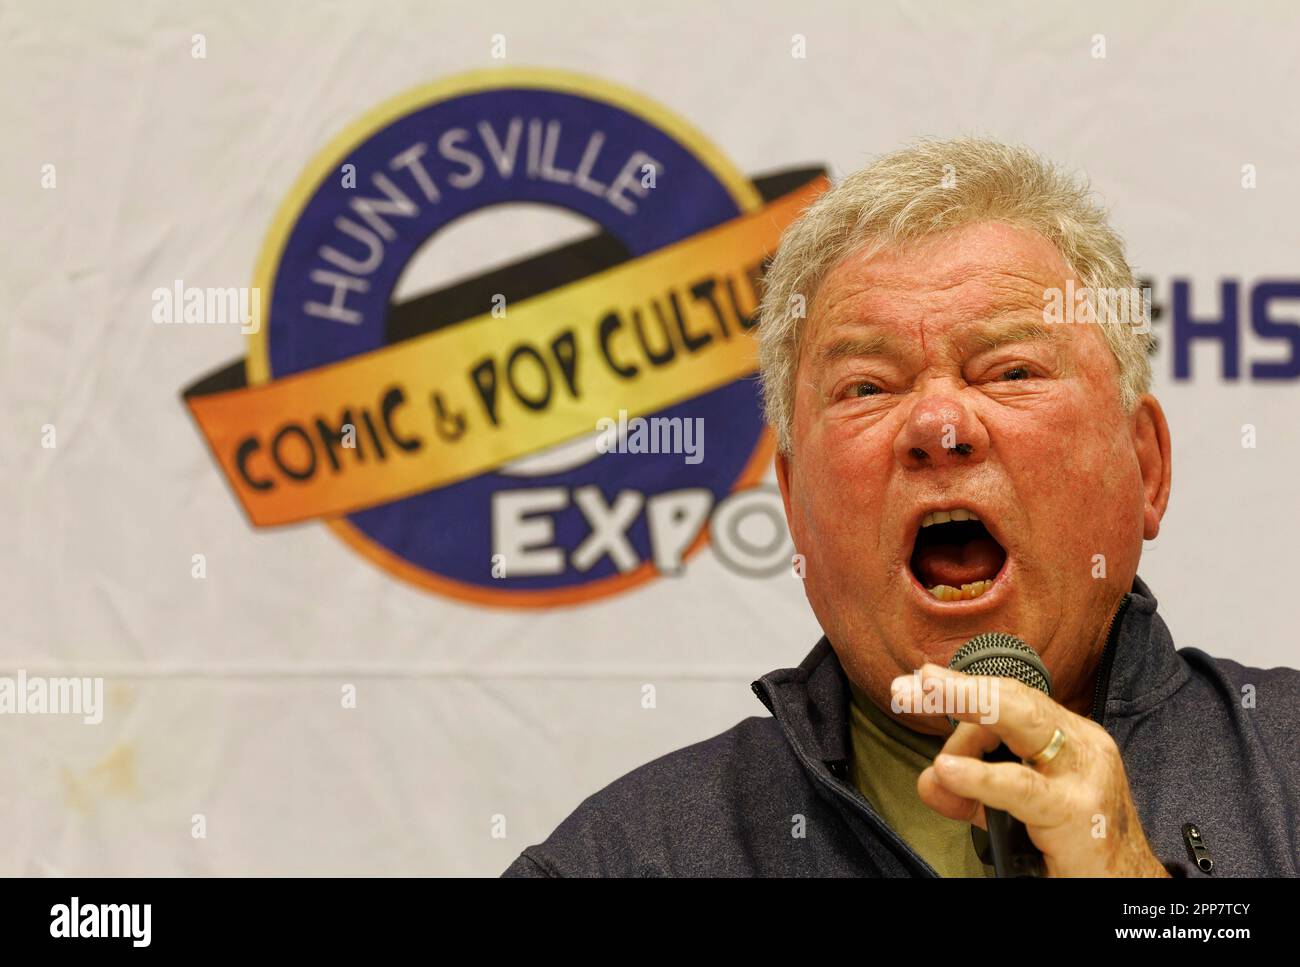 Huntsville, Alabama, USA. 22 Apr 2023. Star Trek actor William Shatner screams 'Khaaan!' like he famously did in the 1982 film Star Trek II: The Wrath of Khan in response to an audience member's request on the second day of the 2023 Huntsville Comic & Pop Culture Expo on Saturday, April 22, 2023 at the Von Braun Center in Huntsville, Madison County, AL, USA. The Canadian actor and author, 92, is perhaps best known for his portrayal of Capt. James Tiberius Kirk in the original Star Trek television series and subsequent movies. (Credit: Billy Suratt/Apex MediaWire via Alamy Live News) Stock Photo